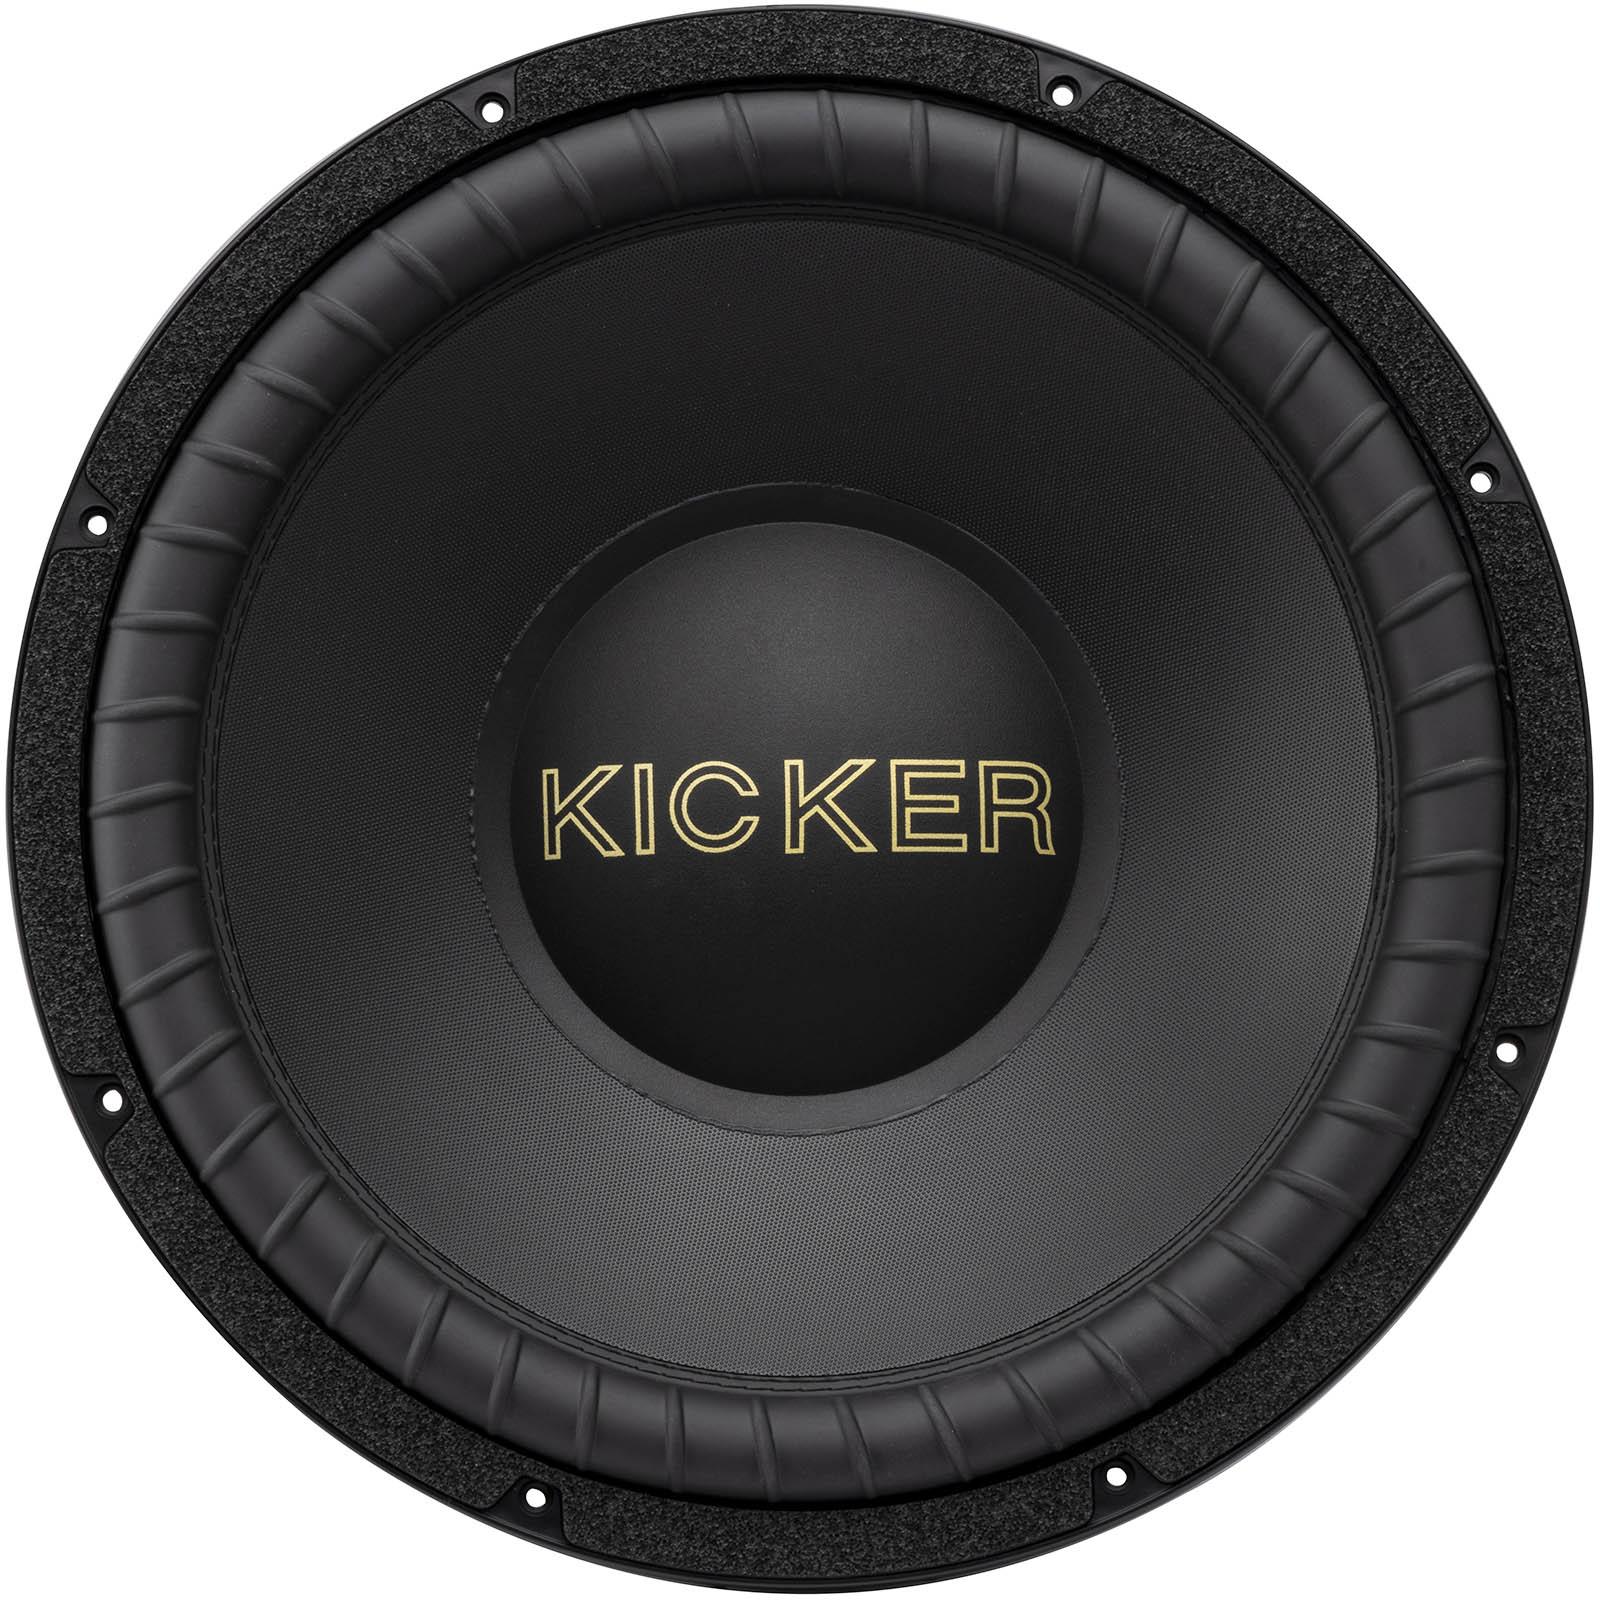 Photos - Car Subwoofer Kicker 50GOLD104 10" 50th Anniversary Subwoofer 